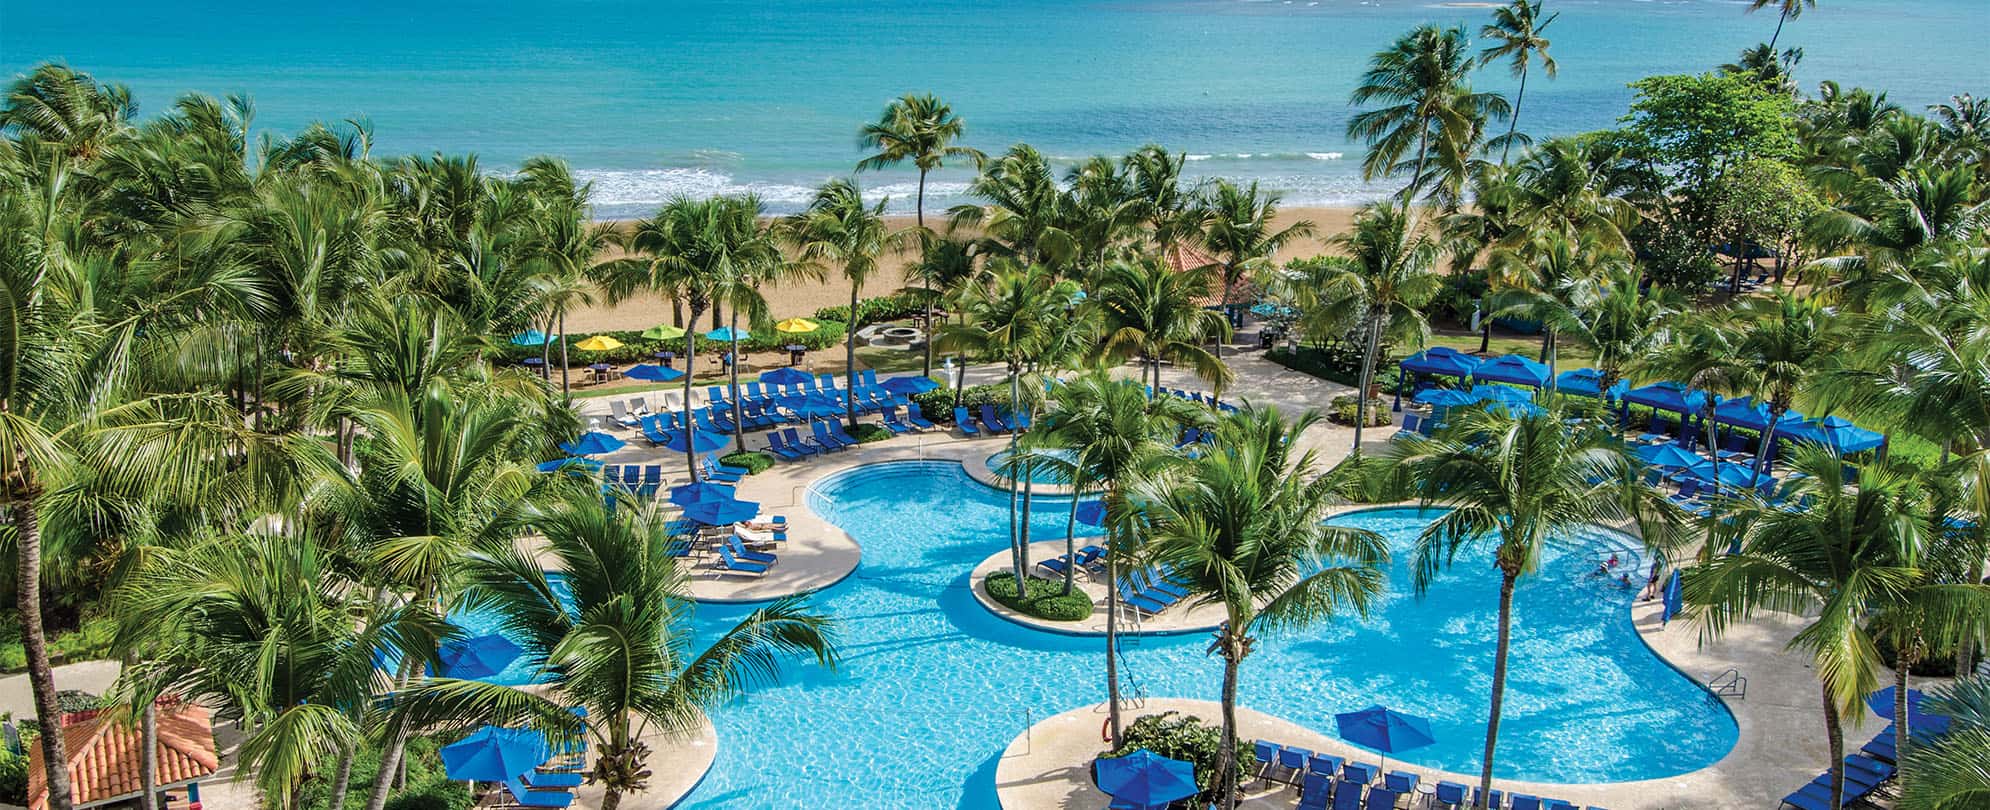 Birds-eye-view of the oceanfront pool at Margaritaville Vacation Club by Wyndham - Rio Mar timeshare resort in Puerto Rico.